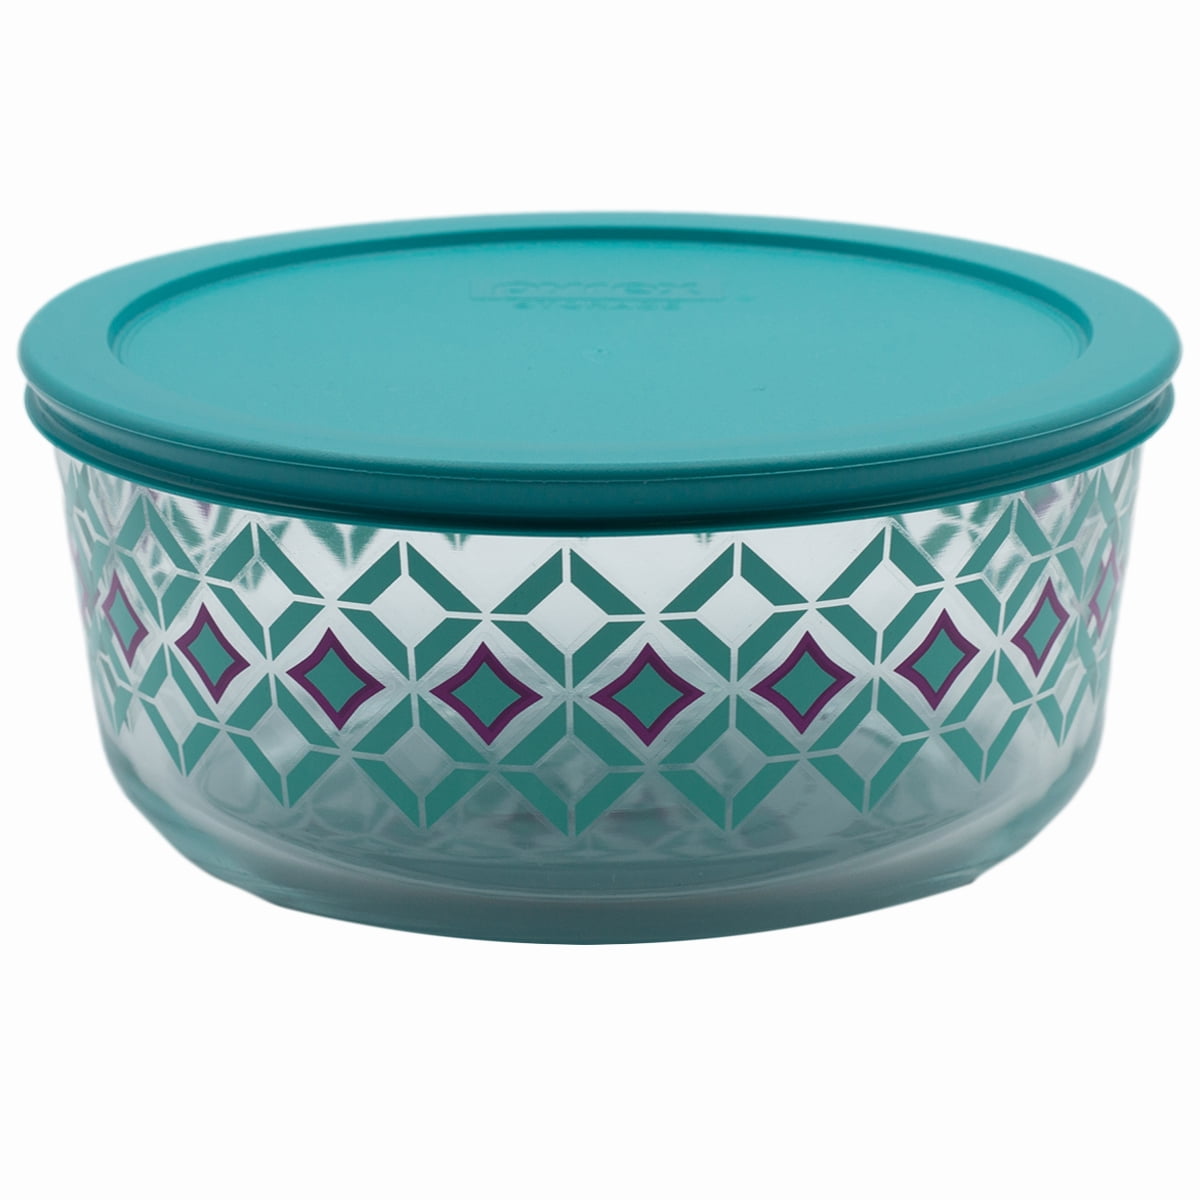 The Pyrex Glass Container Set My Family Loves is on Sale for $3 Apiece